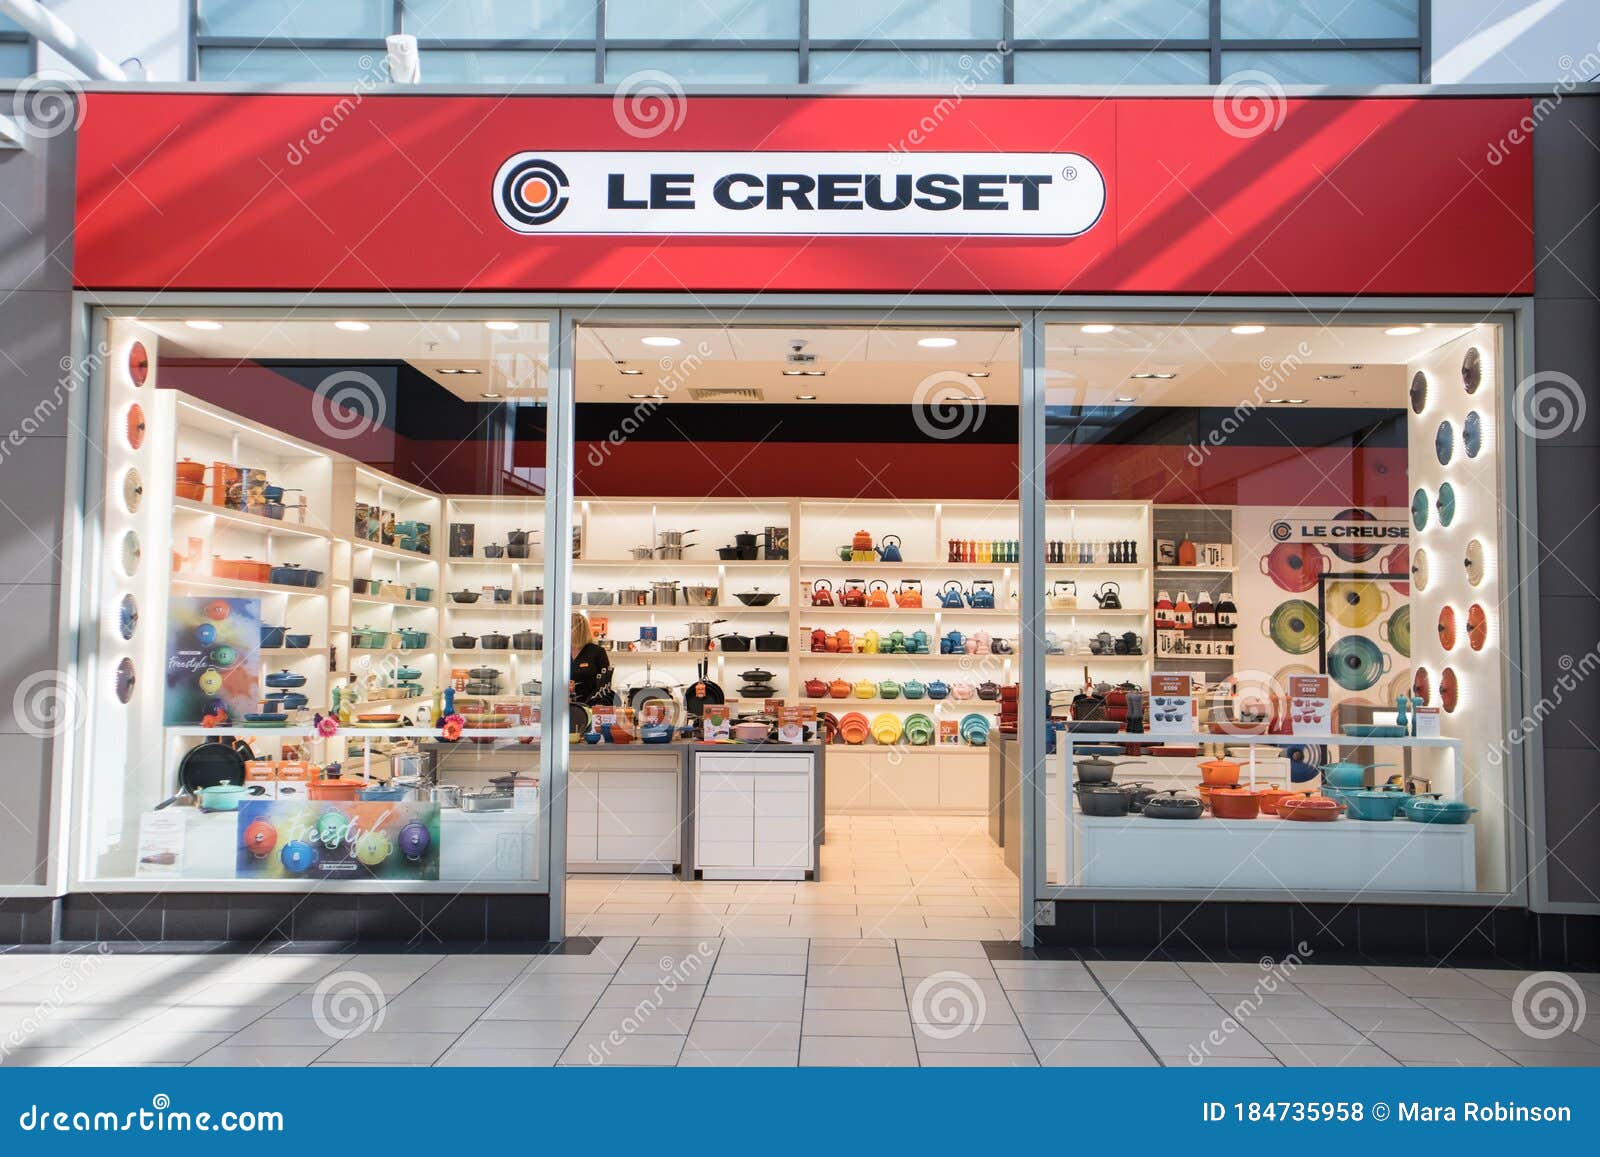 Le Creuset Cooking Store Shop Editorial Stock Photo - Image drink, famous: 184735958